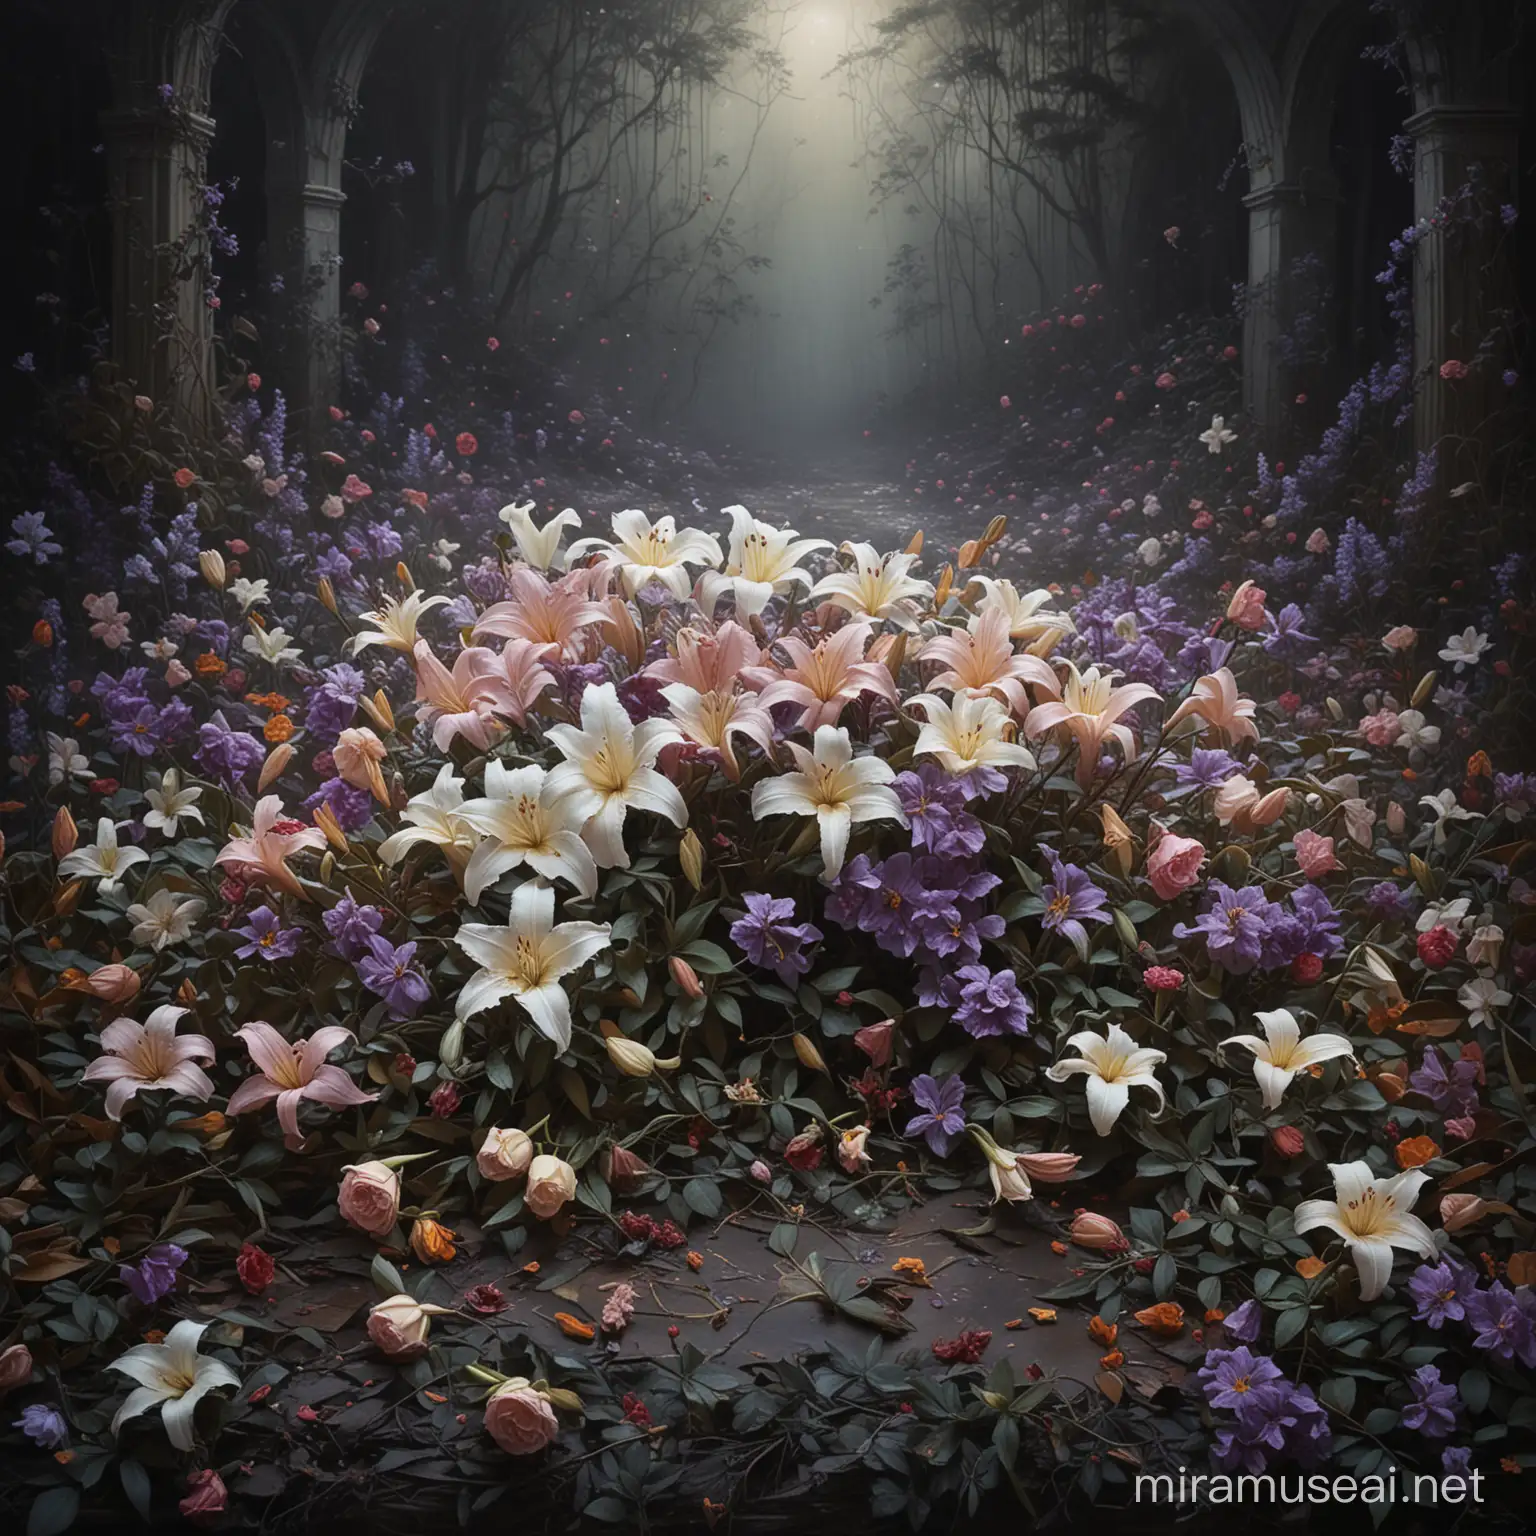 A bed of radiant, decaying flowers in the underworld, the petals vibrant amidst the darkness. The roses and lilies, once vibrant, now wilting yet still emitting a ghostly glow in the dim light. The scene is captured in a stunning oil painting, showcasing every delicate detail with a haunting beauty. The flowers, a kaleidoscope of colors from whites to deep purples, evoke a sense of melancholy and ephemeral charm. This mesmerizing image effortlessly combines the allure of life with the inevitability of decay, inviting the viewer to ponder on the fleeting nature of beauty.